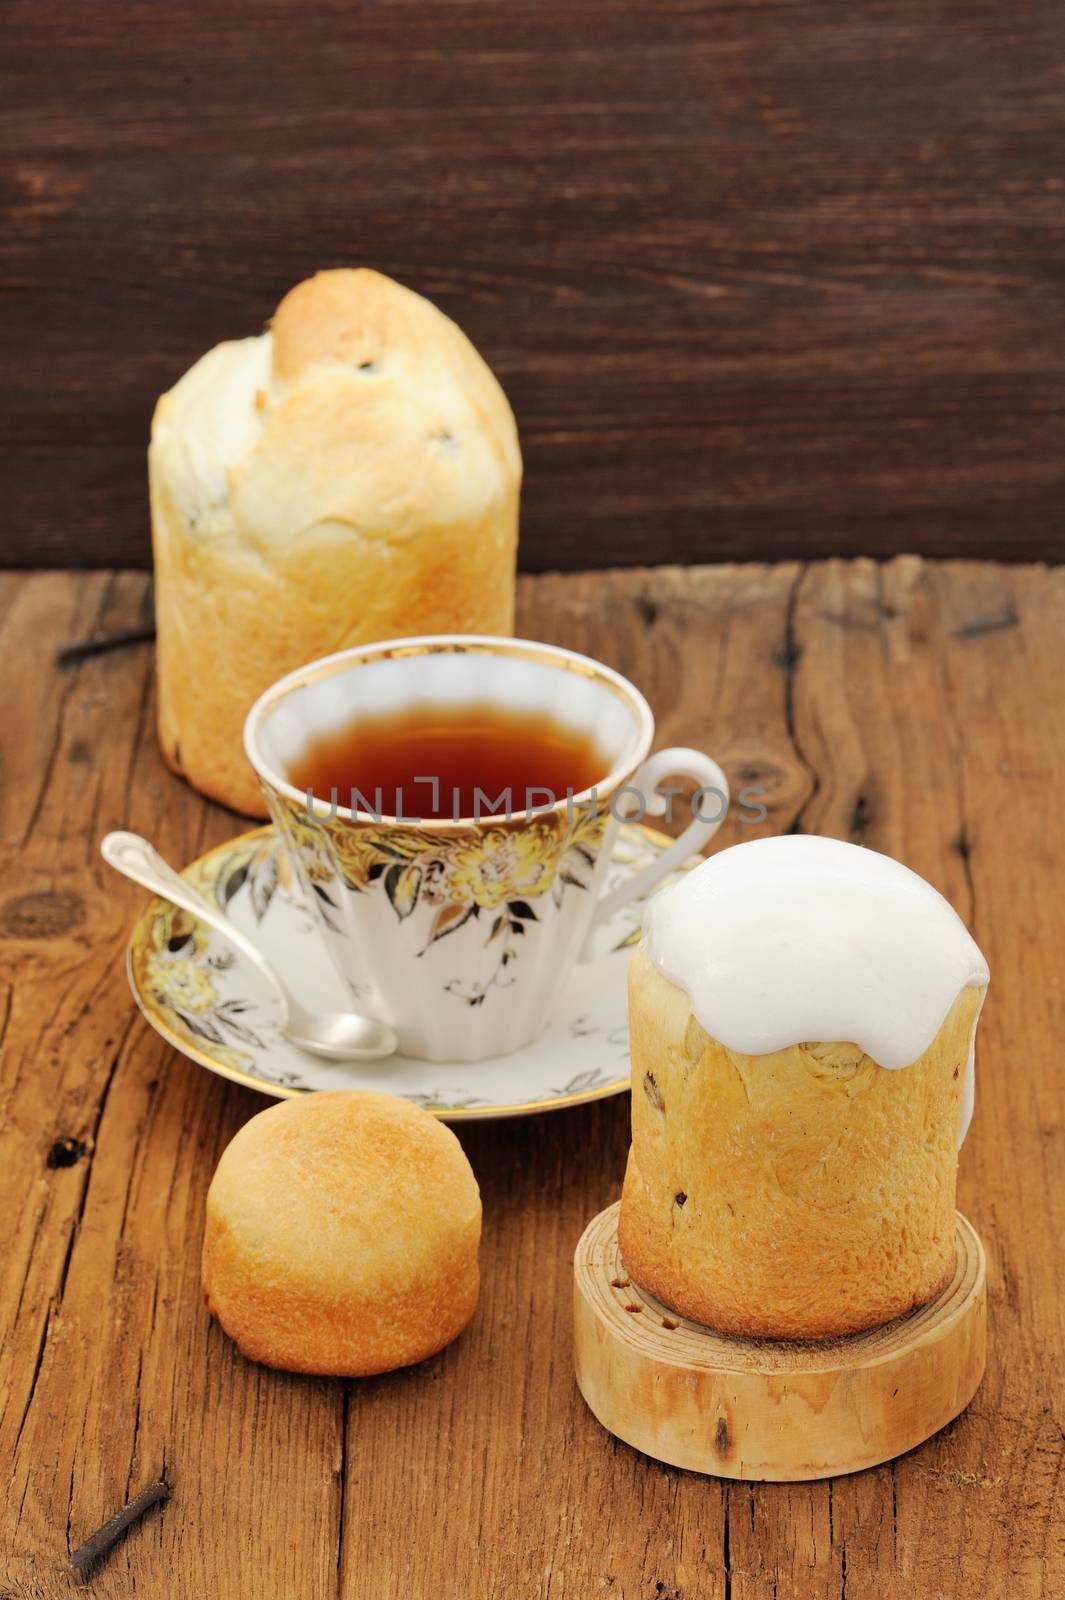 Kulichi, traditional Russian Easter cake with icing, cup of black tea on wooden background vertical